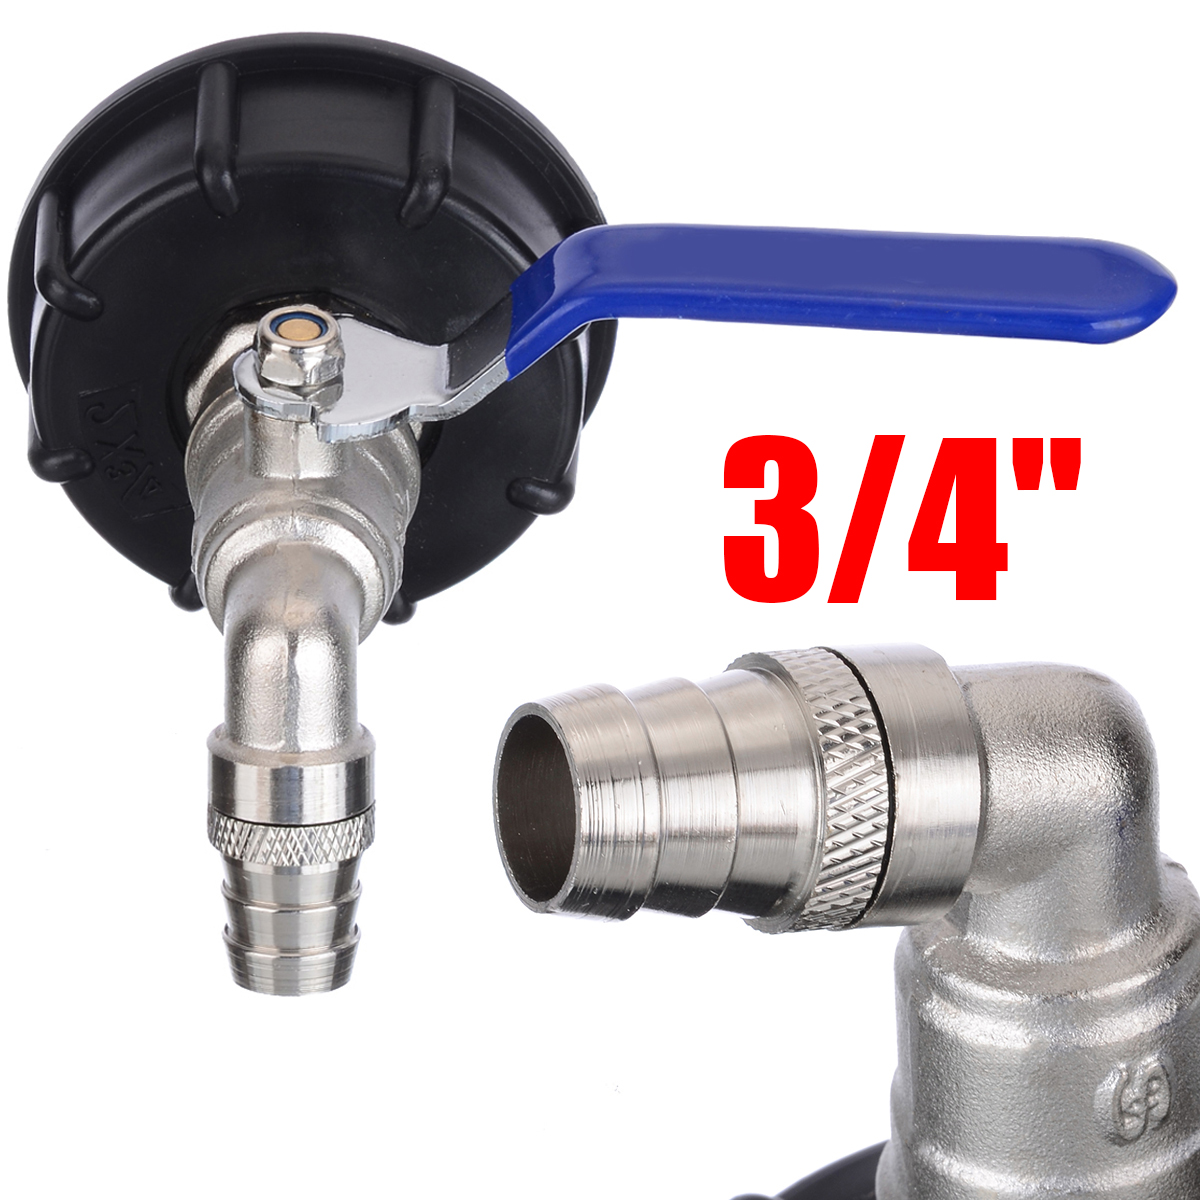 1 pcs IBC Ball Outlet Tap 3/4" Adapter Thread S60x6 Tank 1000 L Tank Fitting Home Garden Rainwater Container